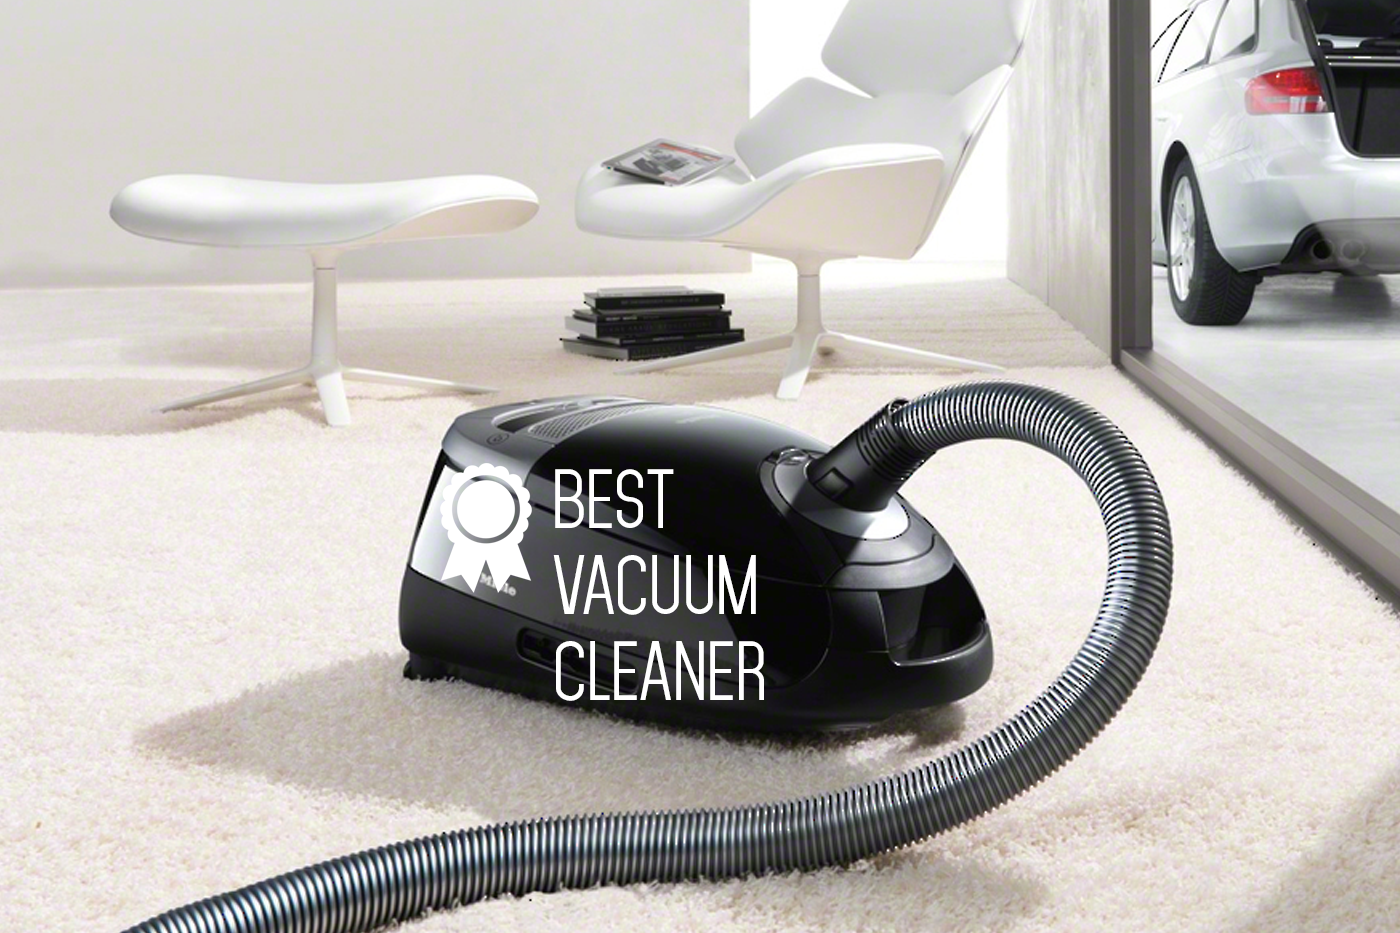 These are the best vacuum cleaner brands that you can buy